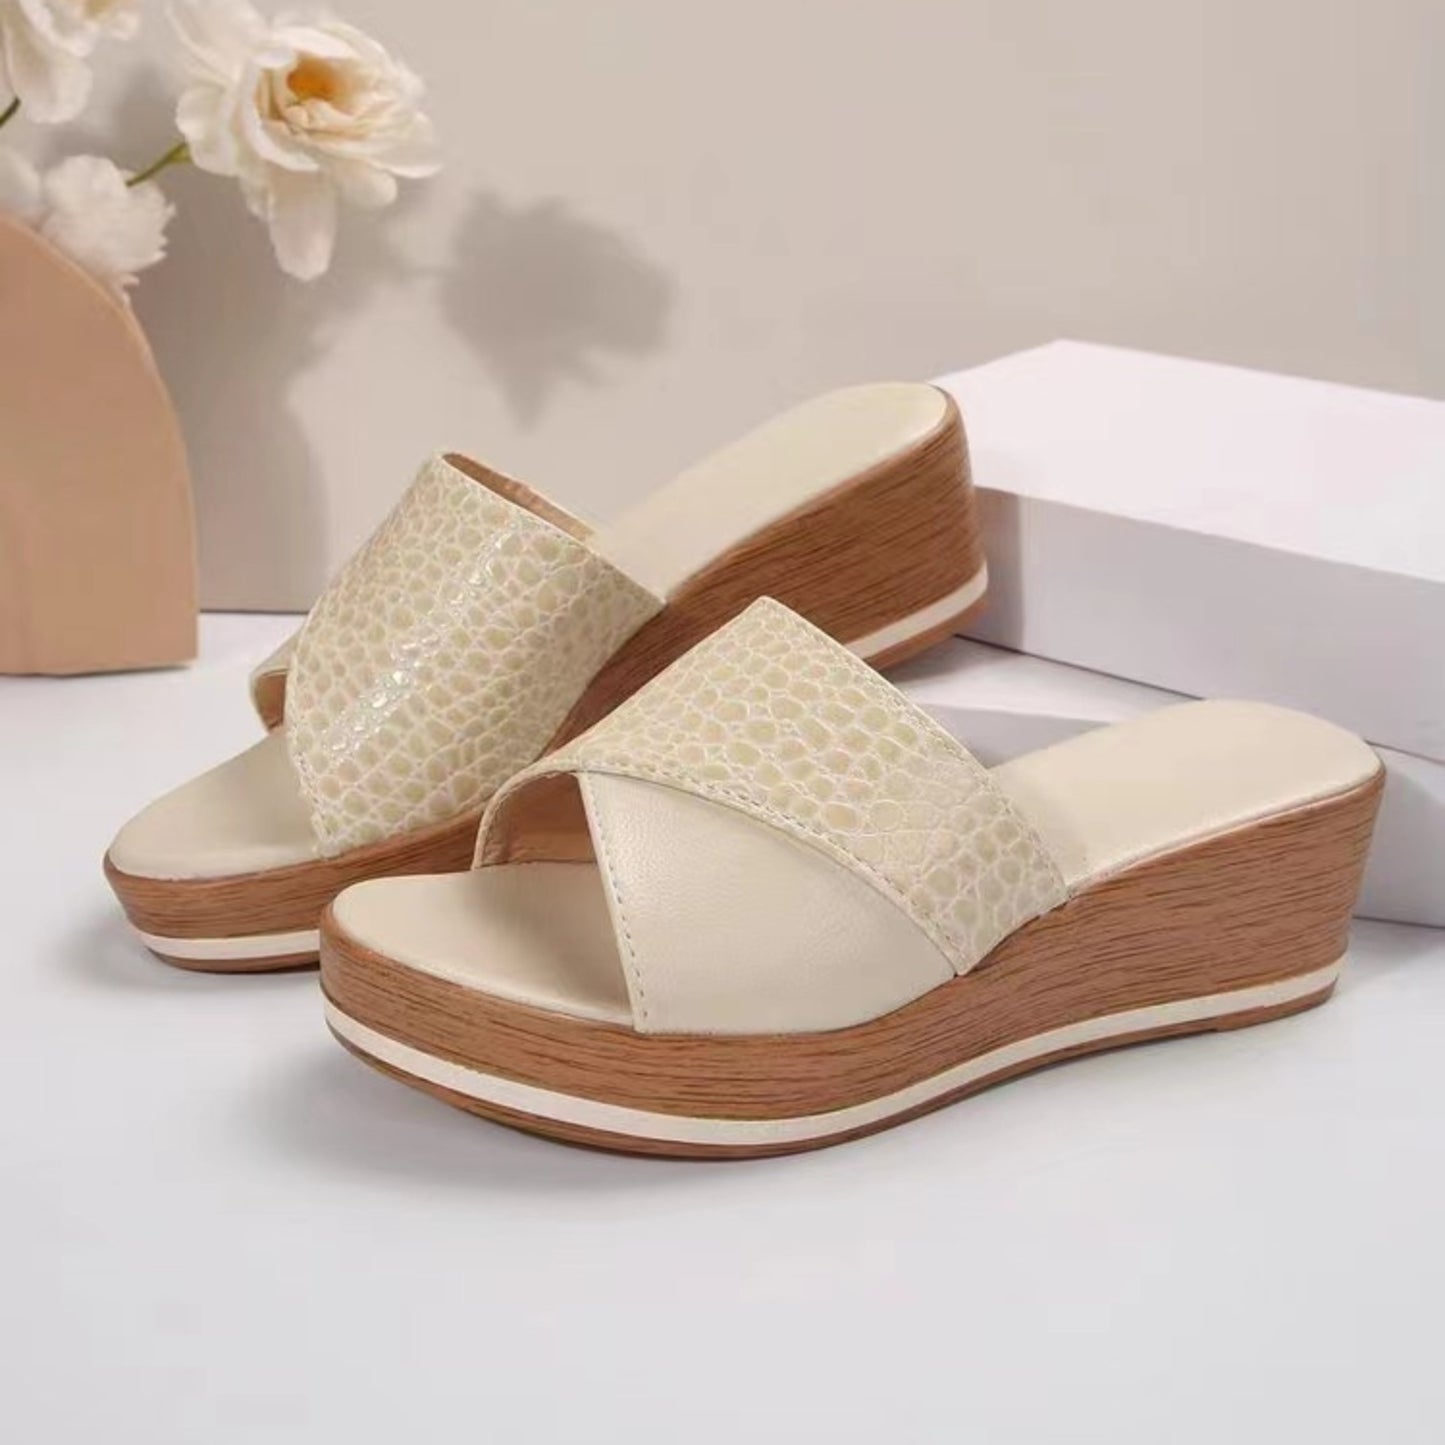 PREORDER- PU Leather Open Toe Sandals